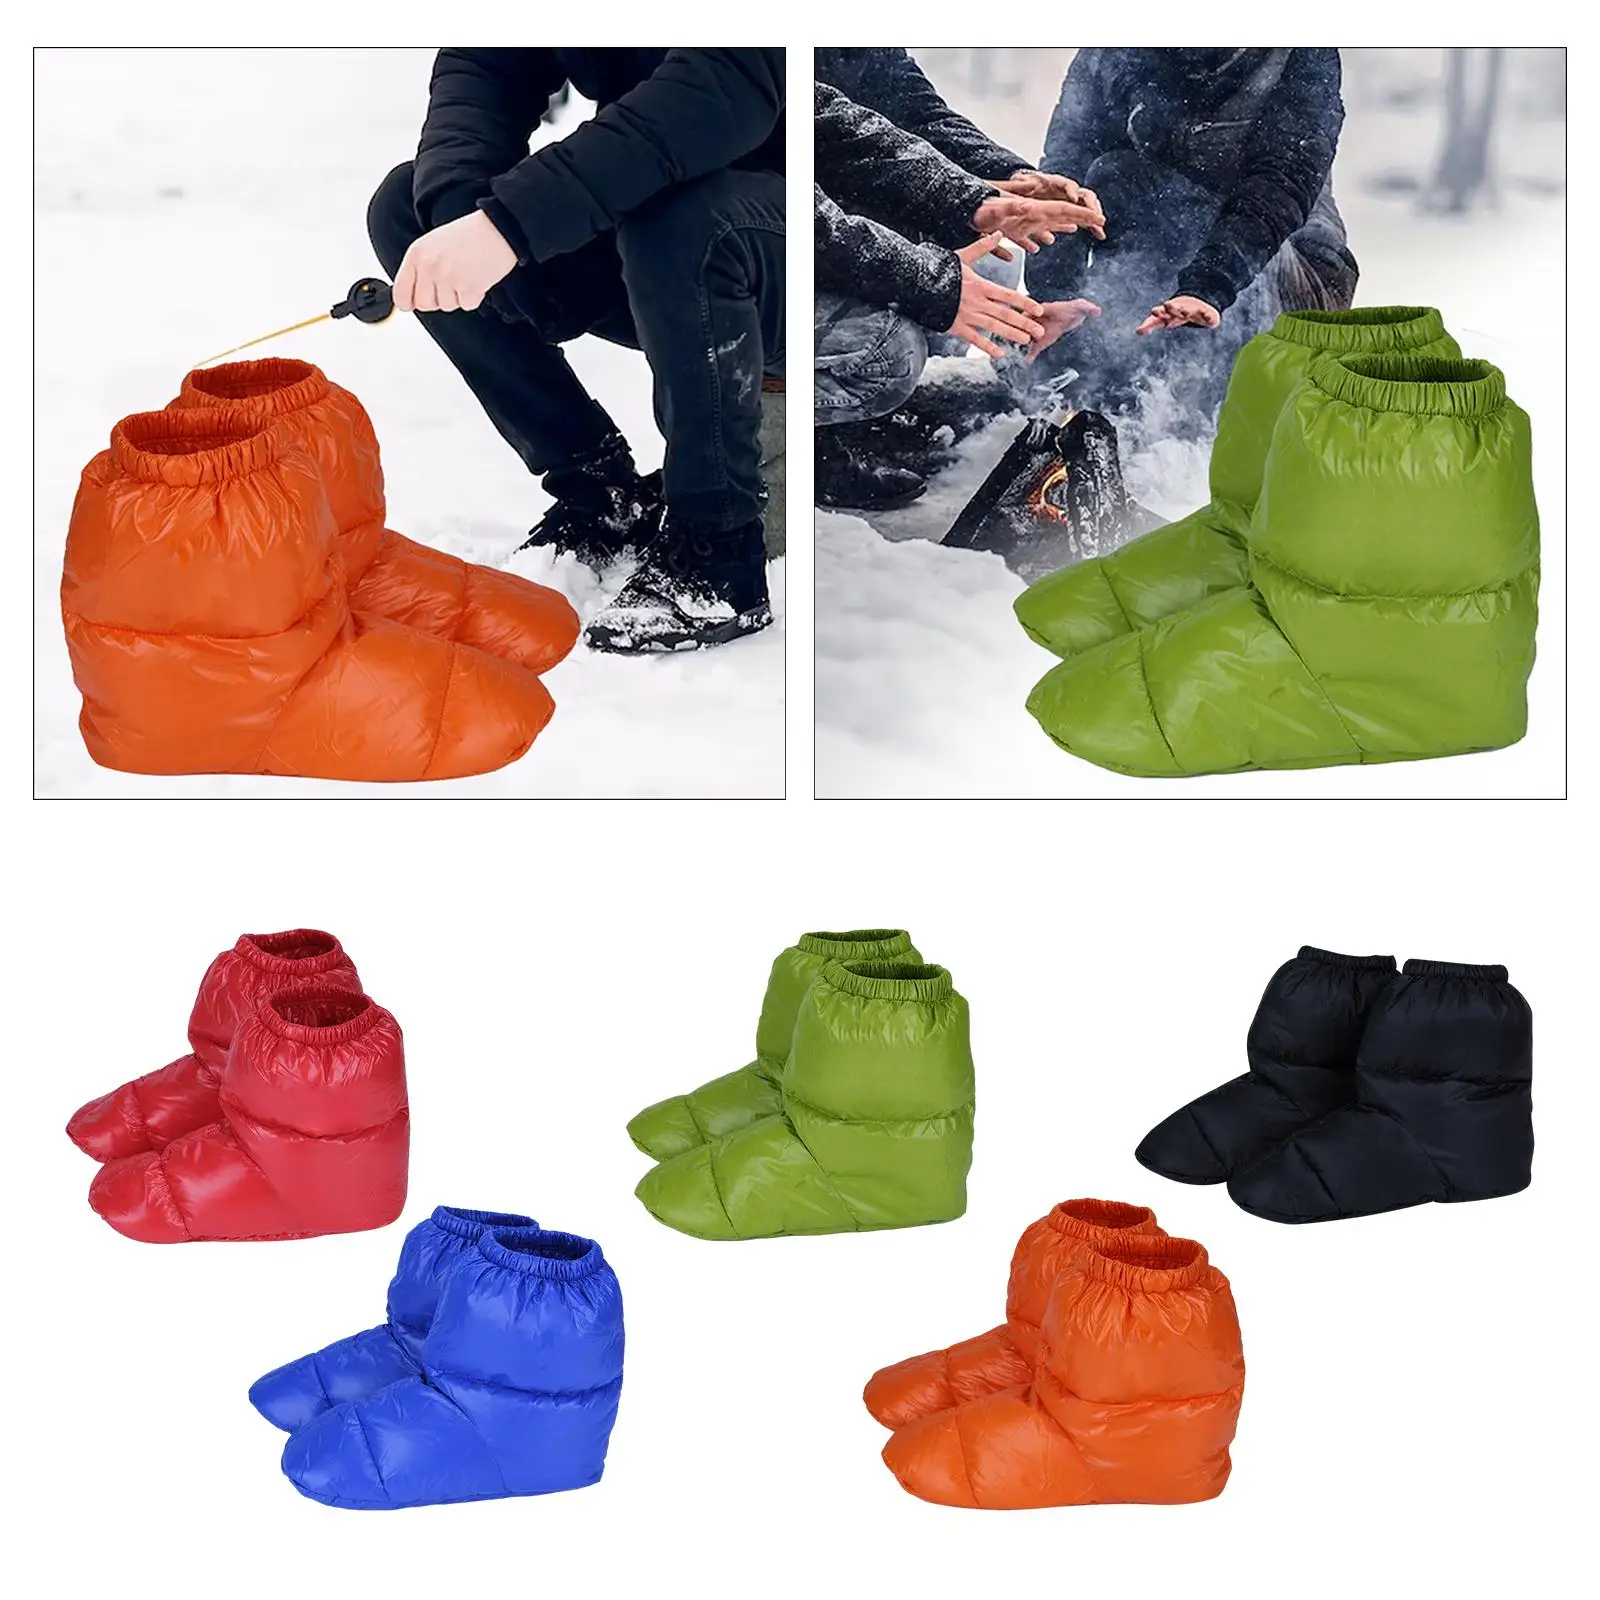 Winter Down Slippers Warm Bootie Shoes Comfortable Lightweight Ankle Snow Boots for Skiing Bedroom Backpacking Fishing Outdoor